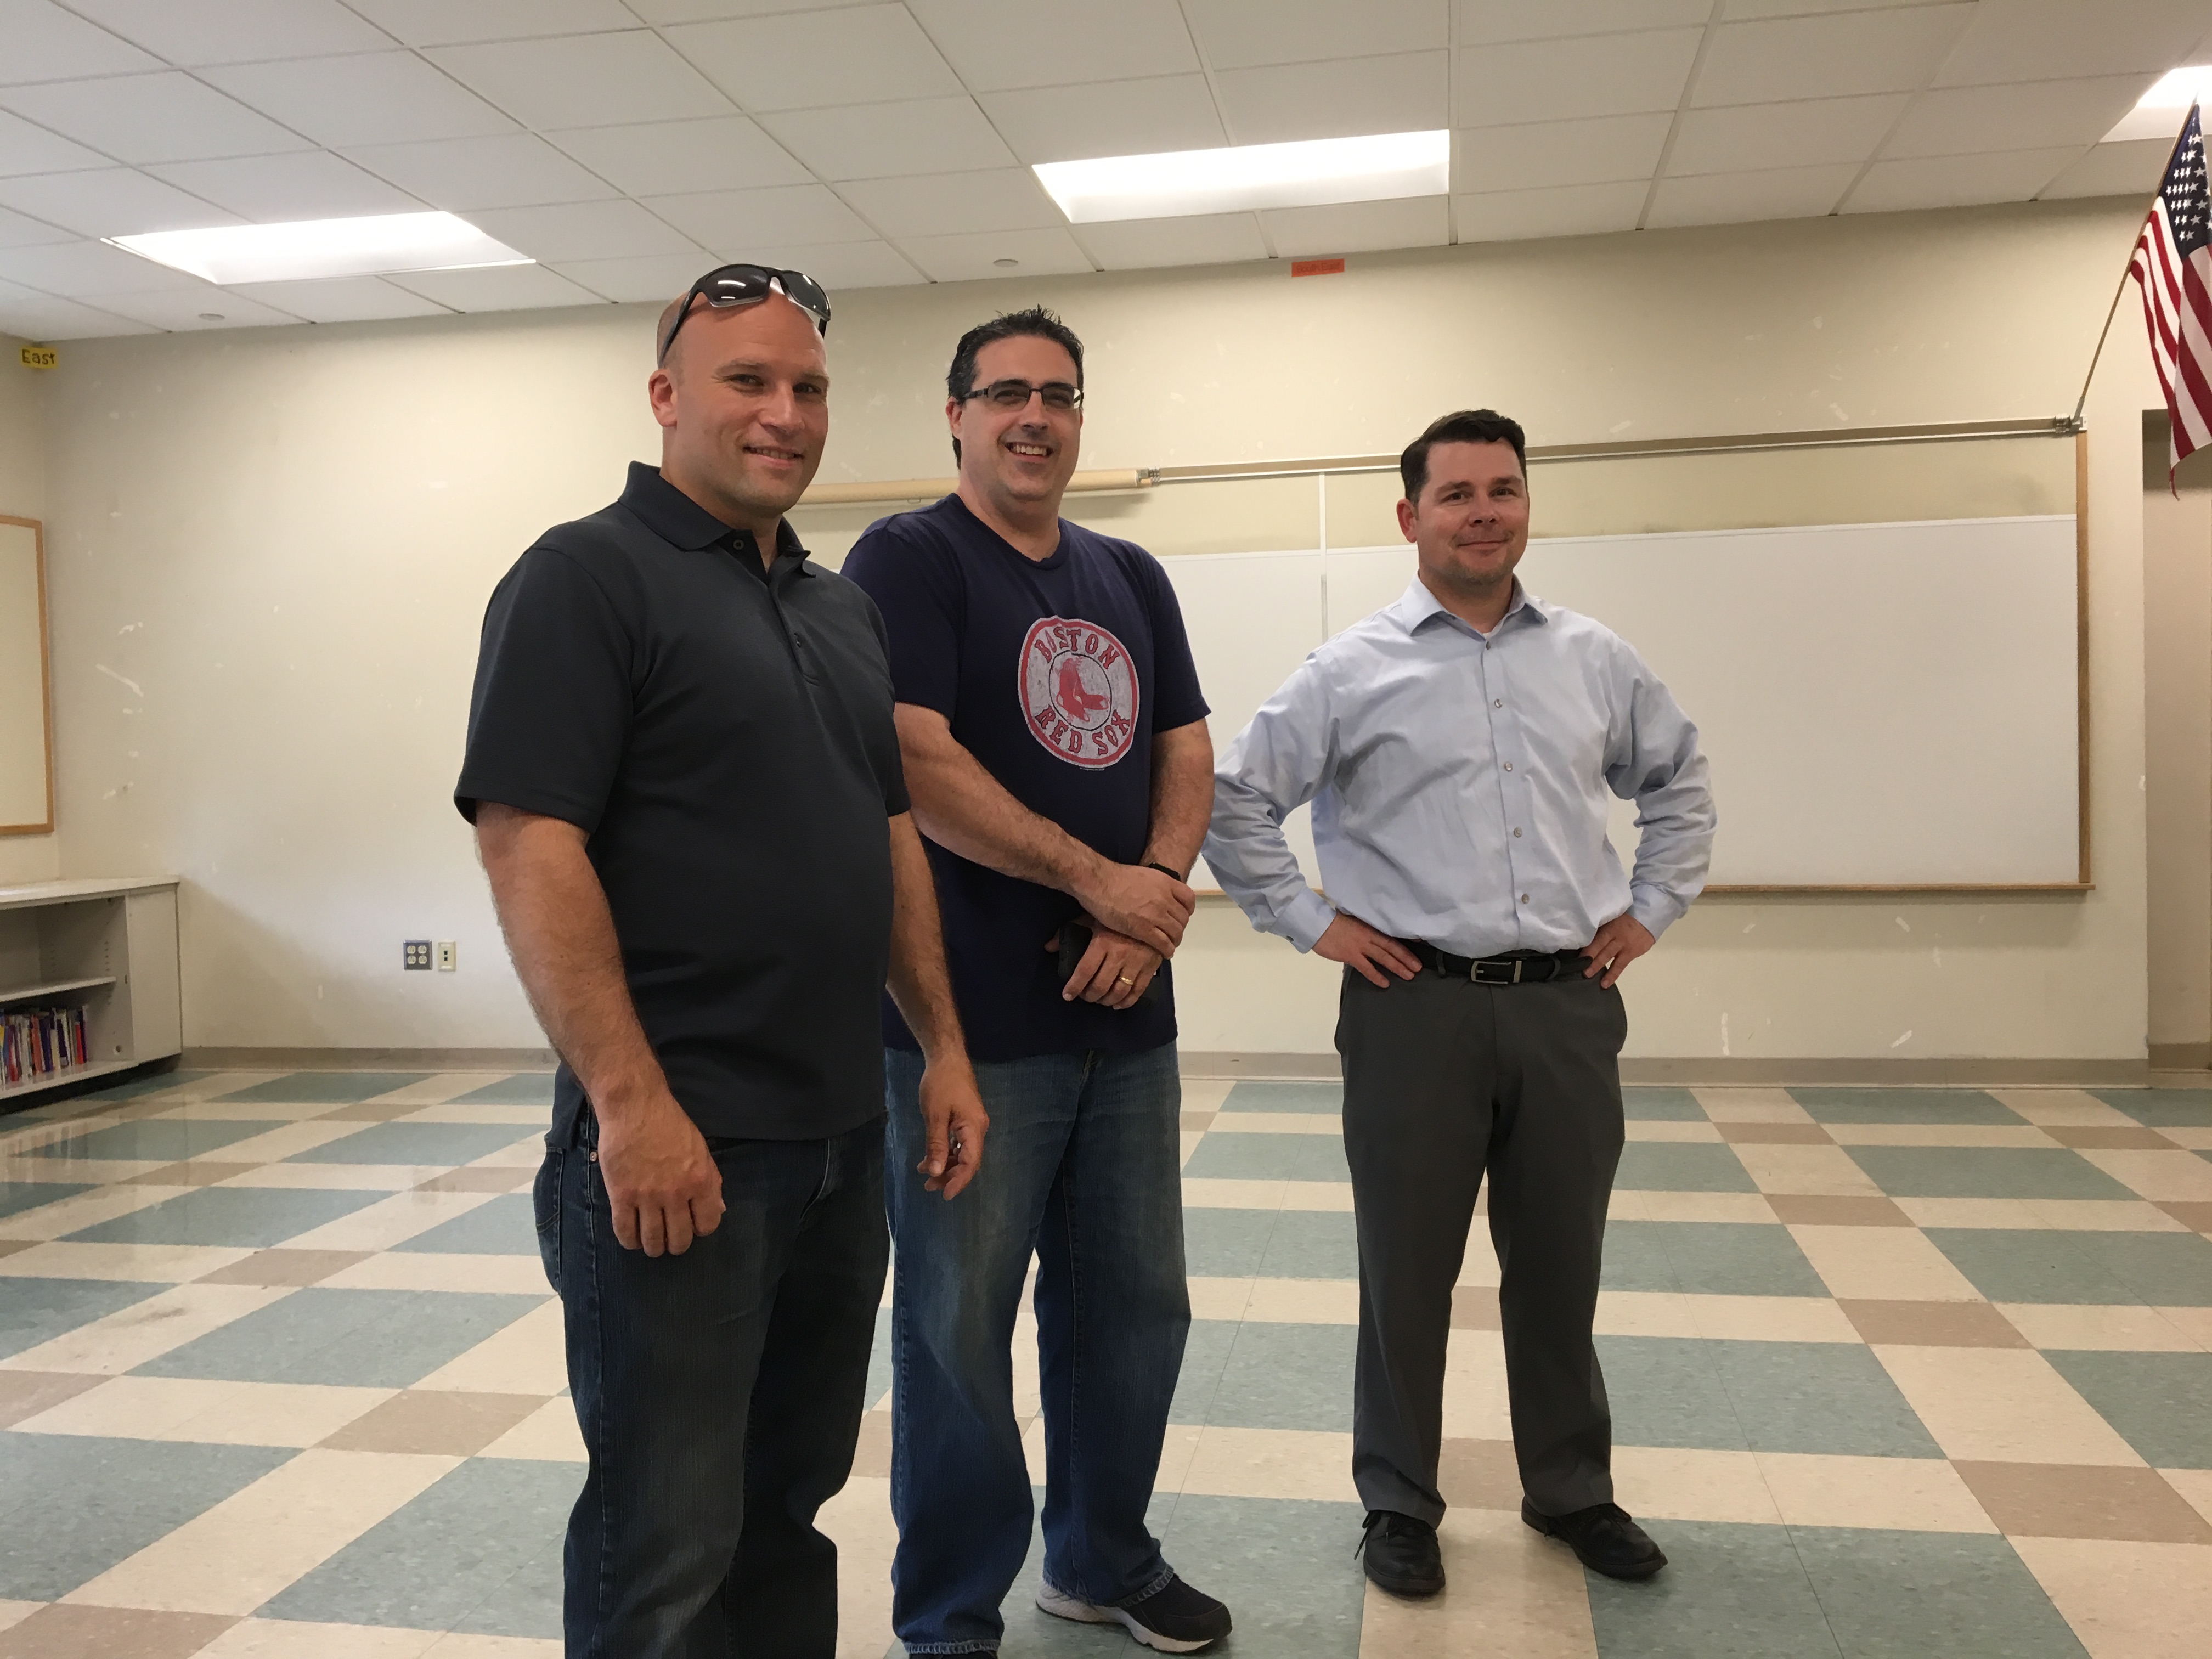 Part of the project team (left to right): Sean Callahan from Ion Lighting Distribution, Mike Menard of Zap Electric, and Matthew Urban, Project Manager, City of Worcester.